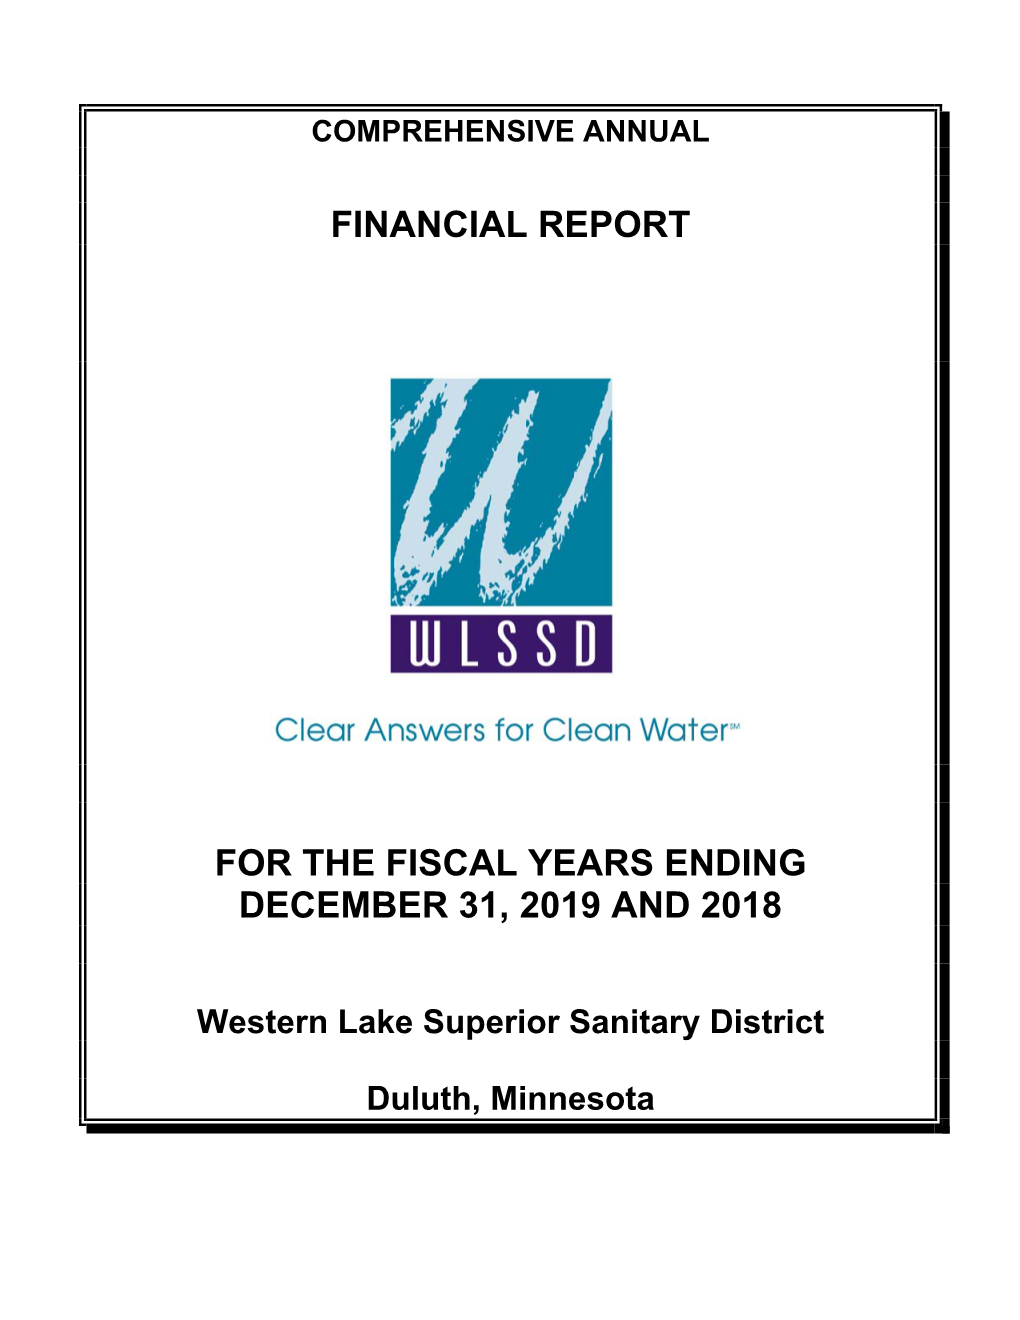 2019 Financial Statements (Western Lake Superior Sanitary District SAUD 2019 [12/31/2019] (Finalized))